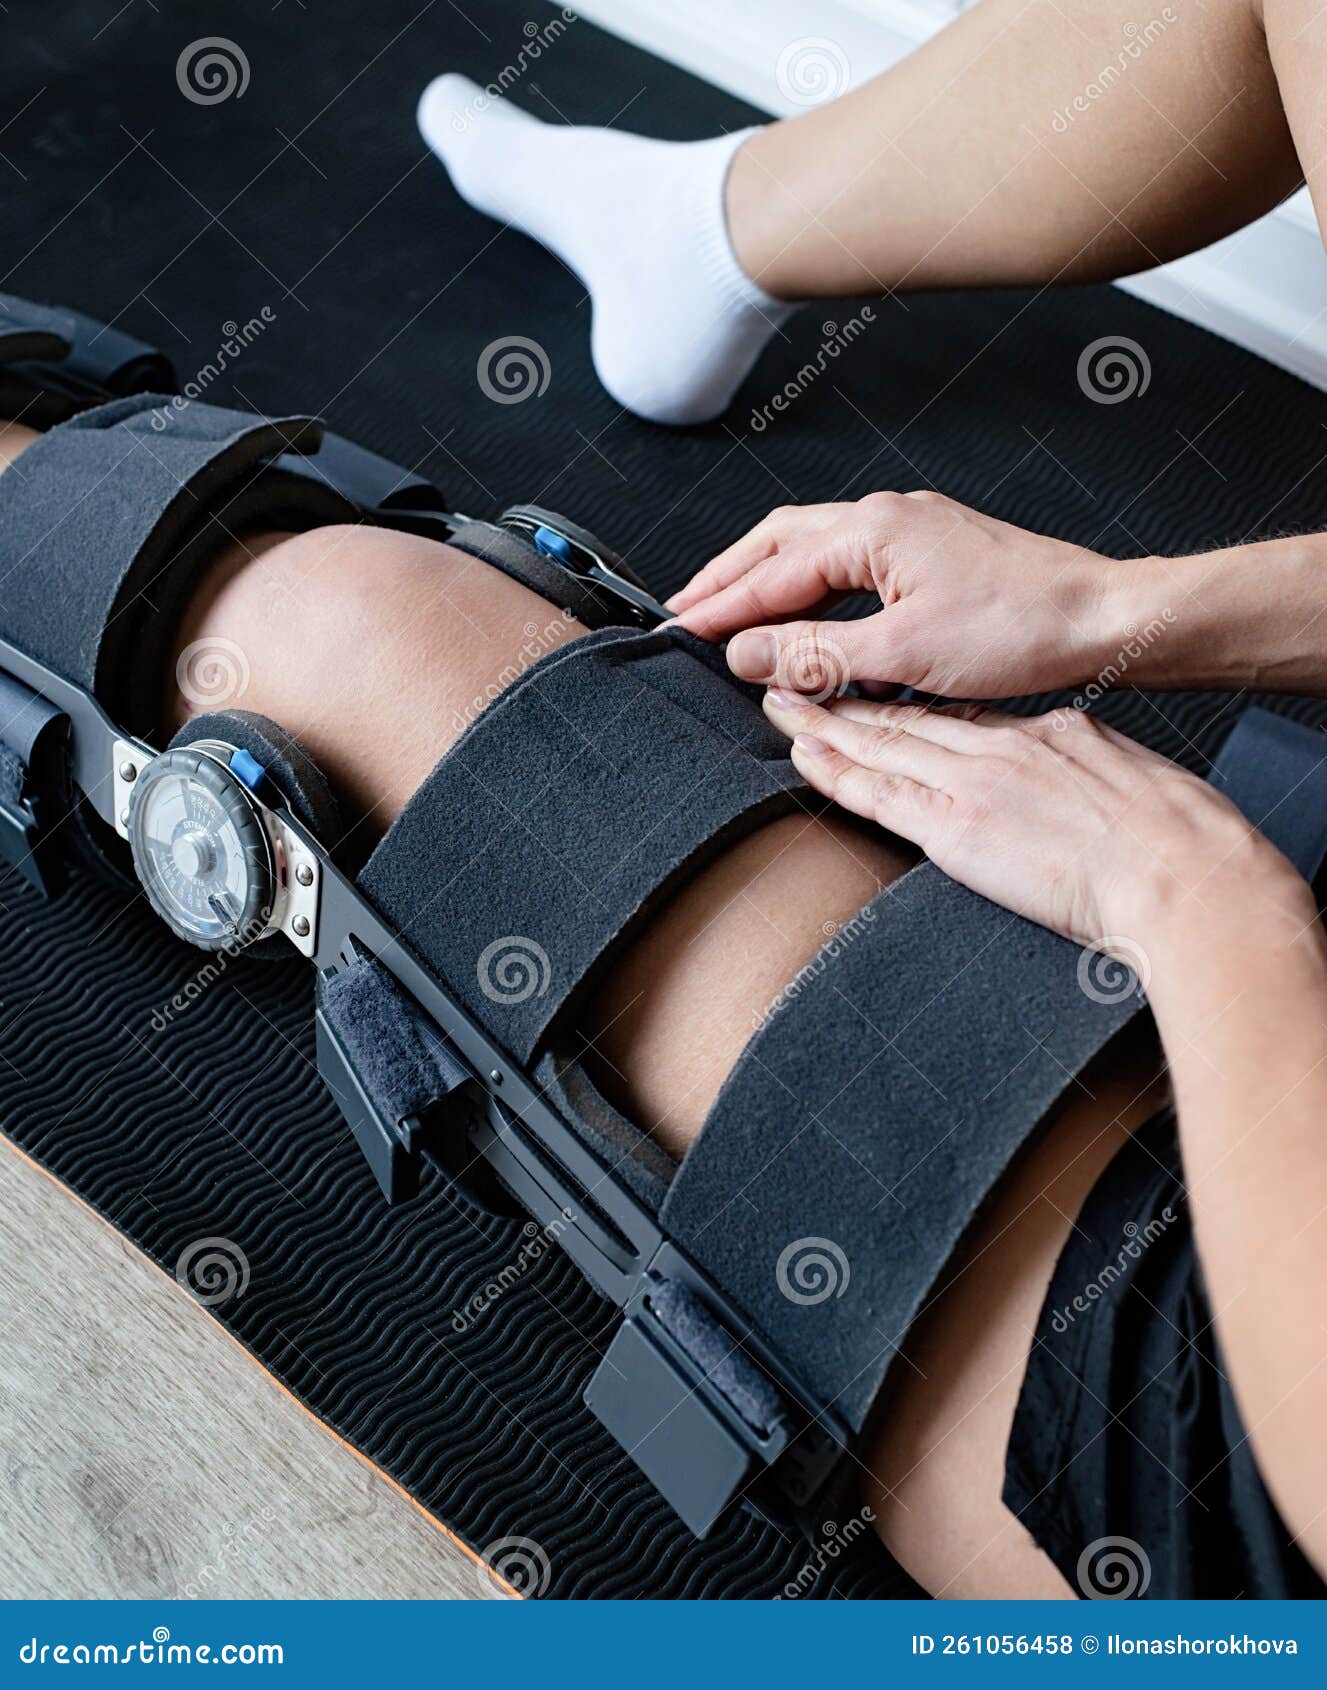 Female Buckling Knee Orthosis or Knee Support Brace after Surgery on Leg  Stock Photo - Image of human, pain: 261056458